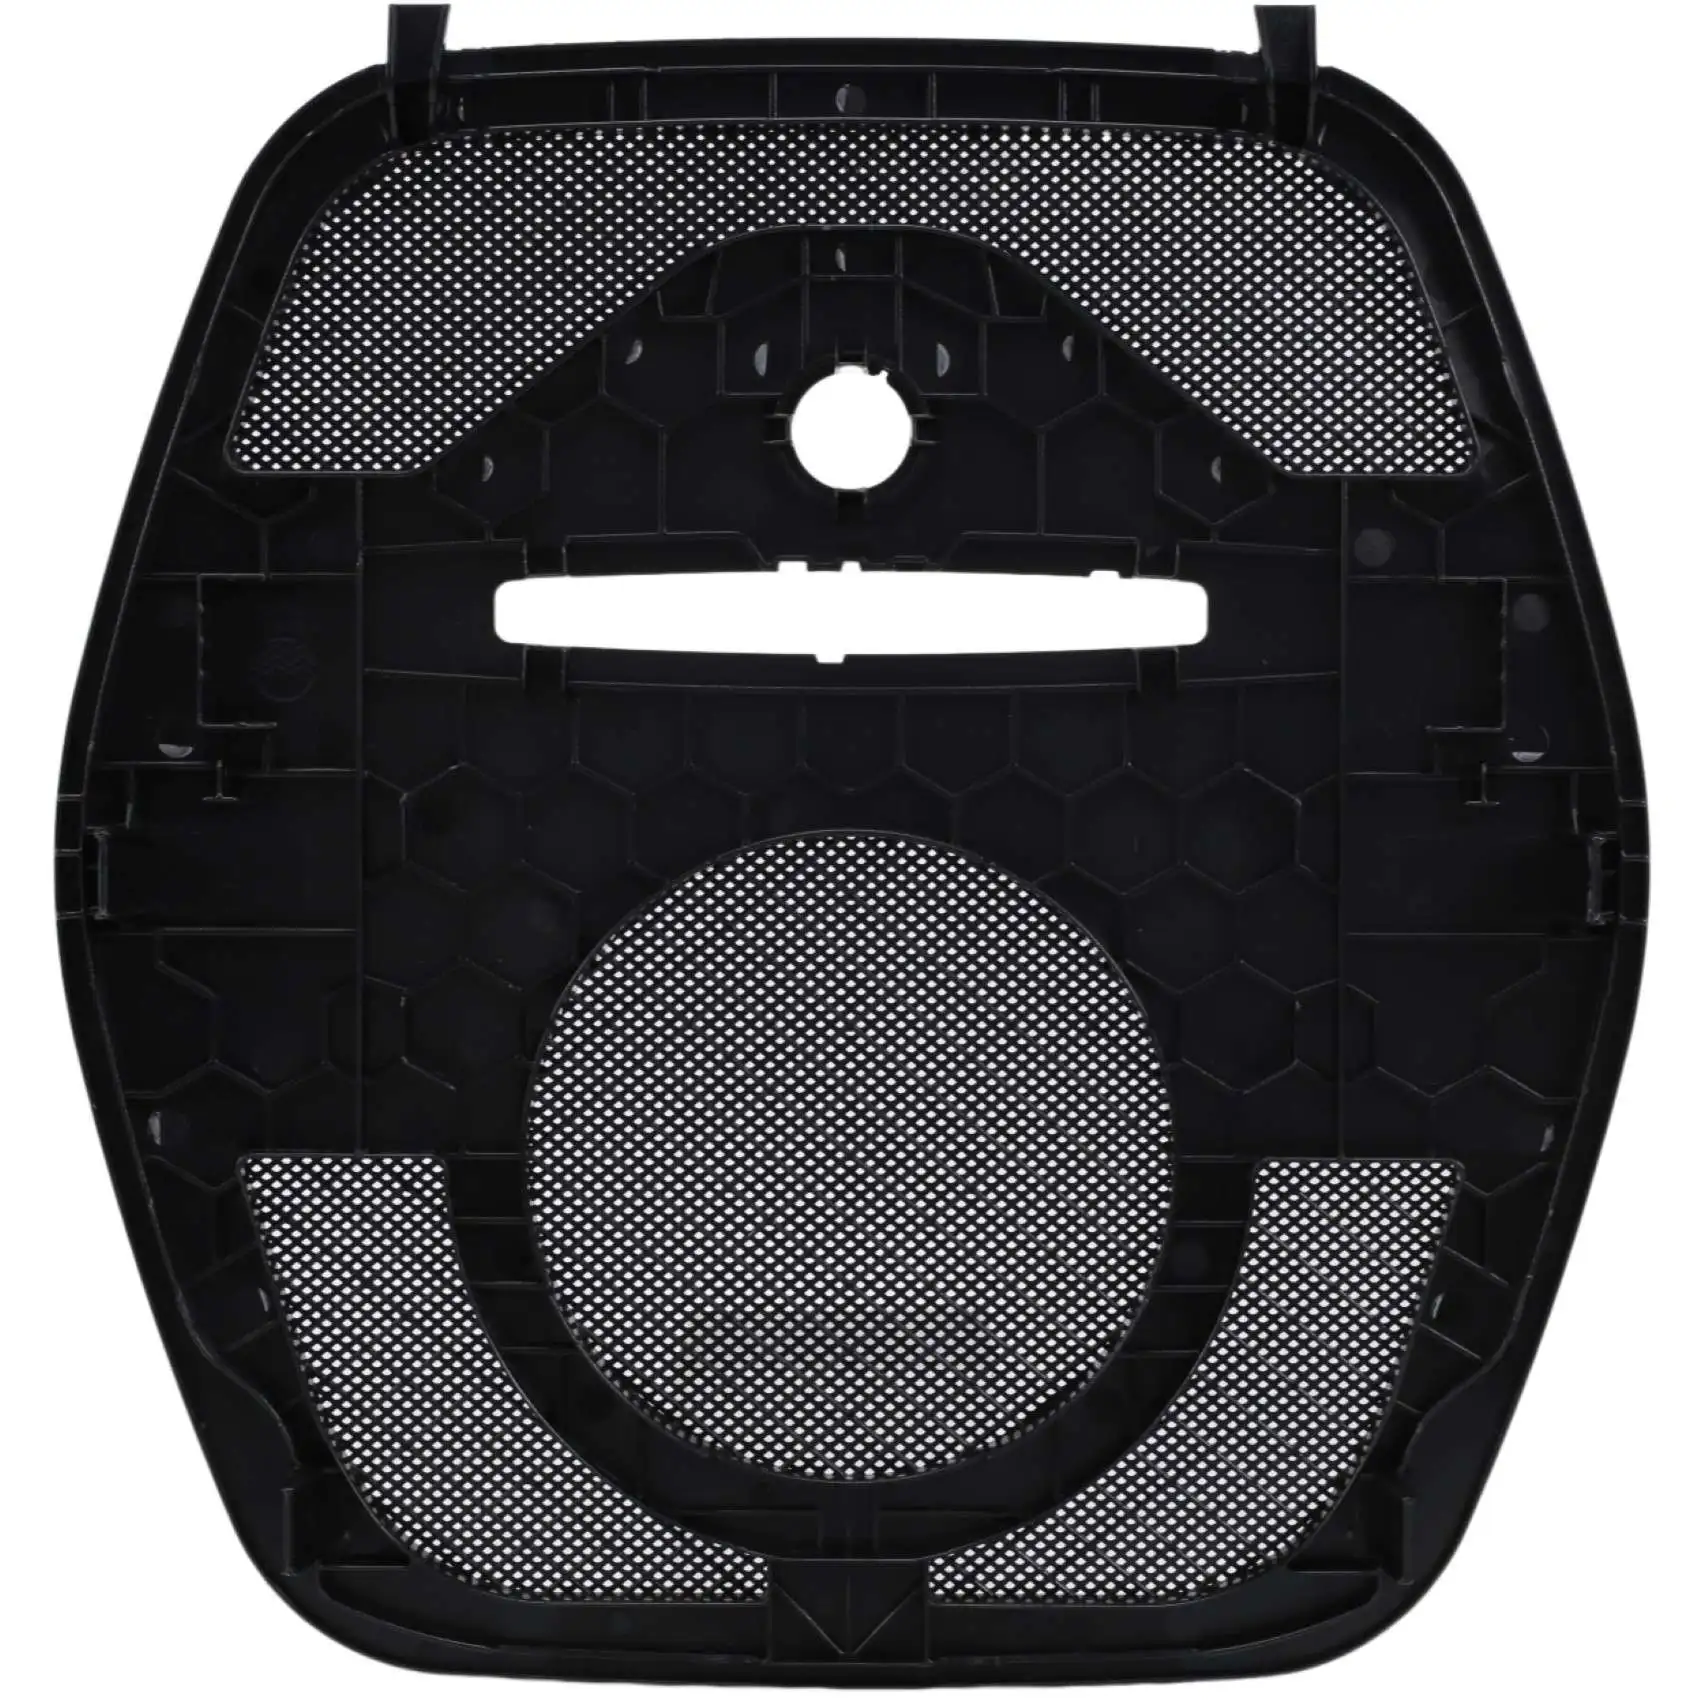 

Car Central Control Panel Loudspeaker Dashboard Speaker Cover Grille for -Mercedes-Benz W166 W292 ML GL GLE GLS Class